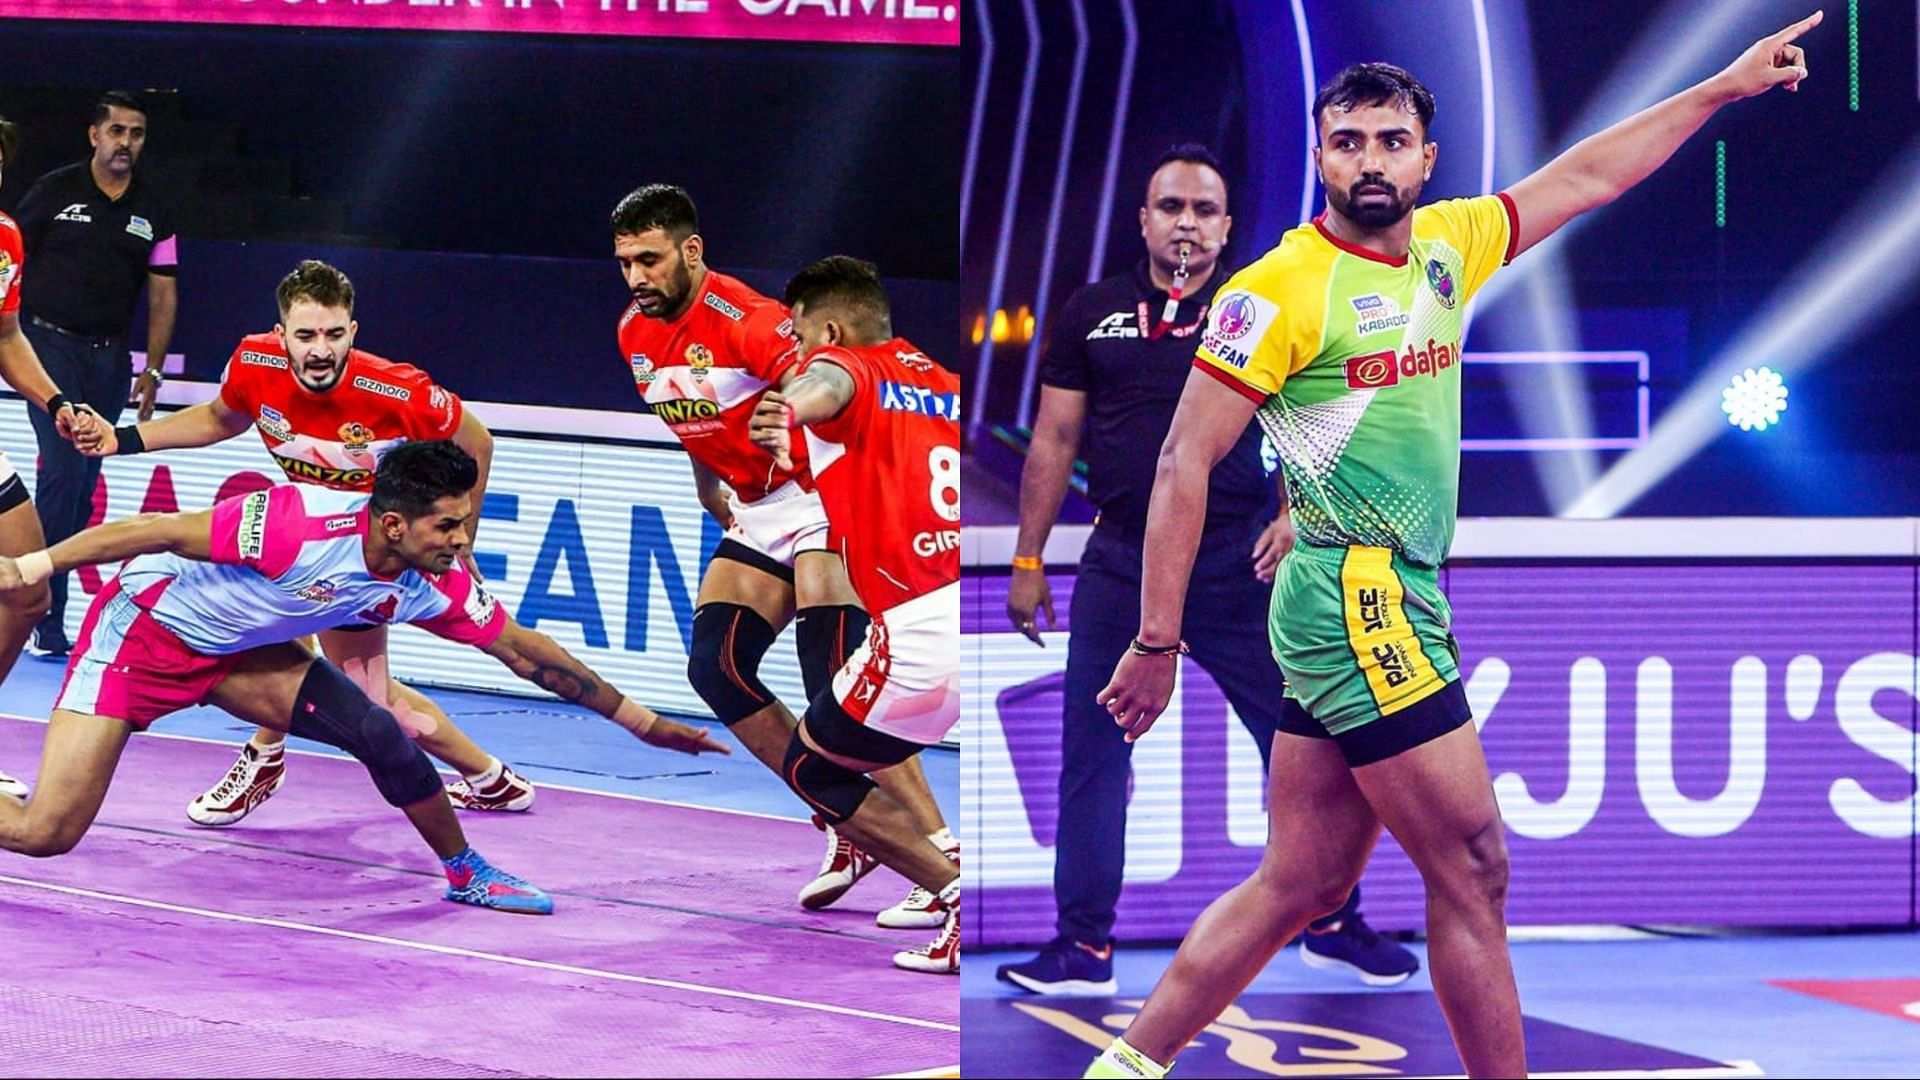 The second day of Pro Kabaddi 2021 was equally dominated by raiders and defenders (Image: Pro Kabaddi/Instagram)